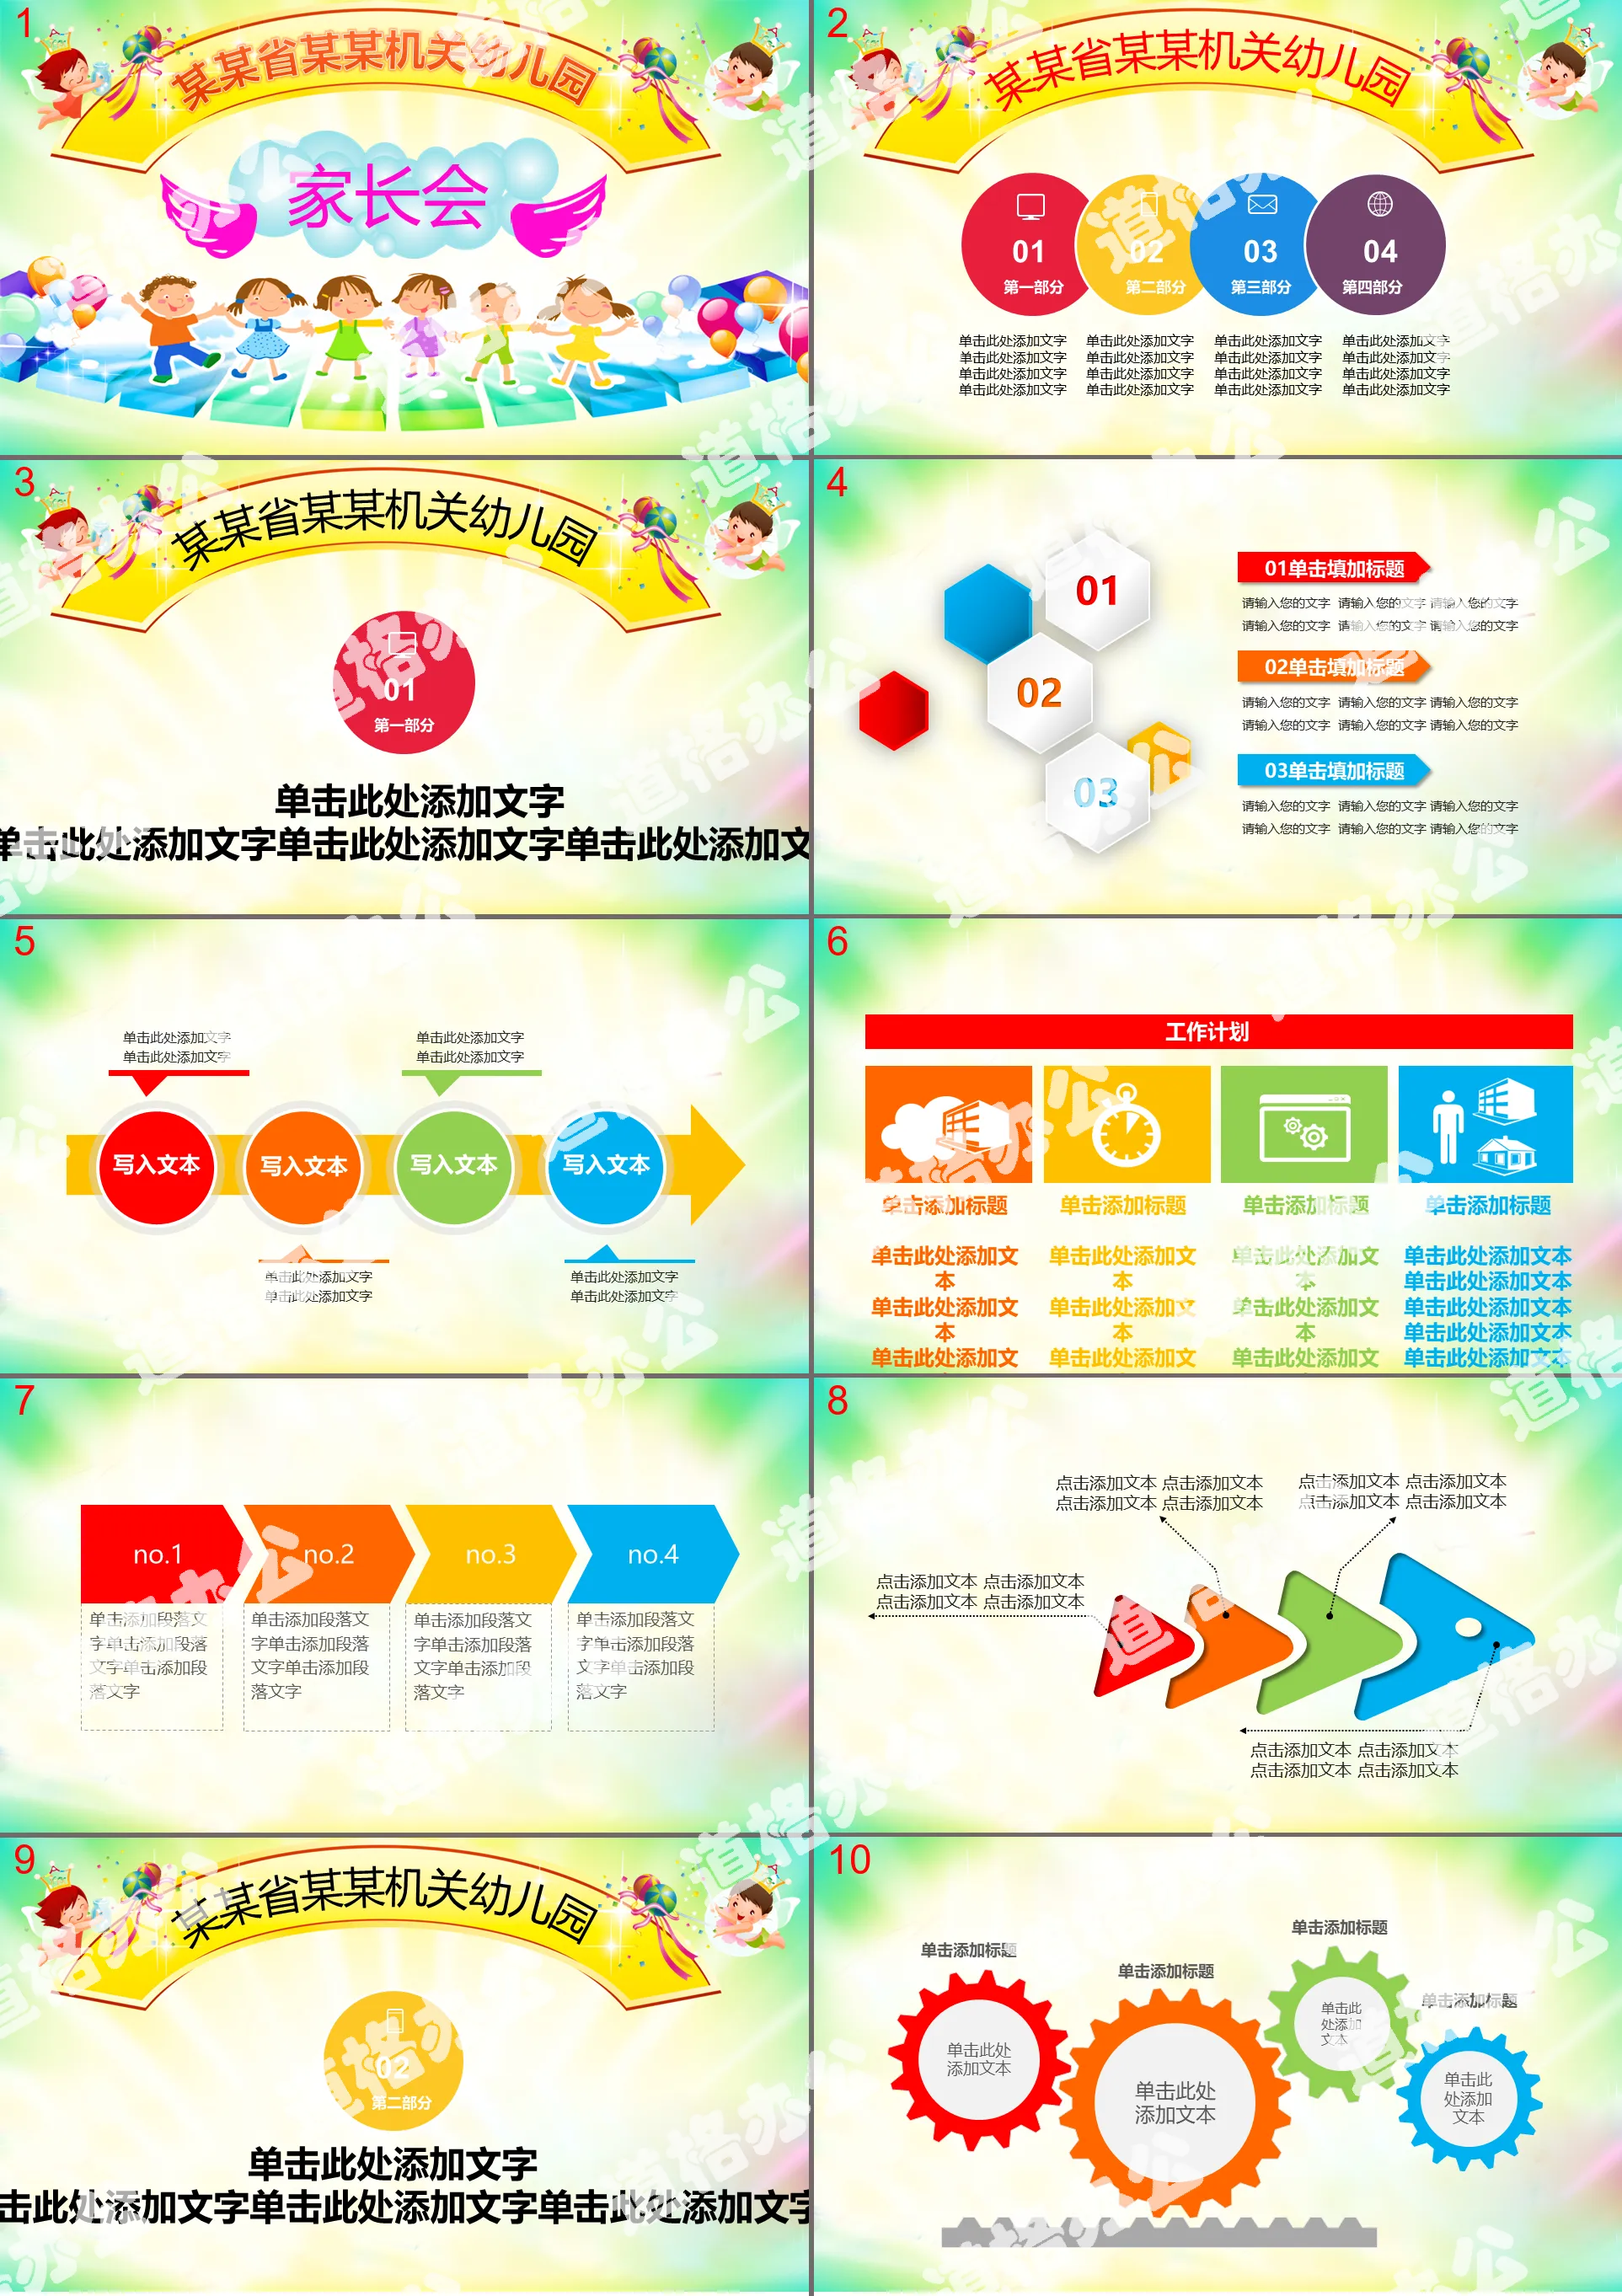 Kindergarten parent meeting PPT template in colorful cartoon style